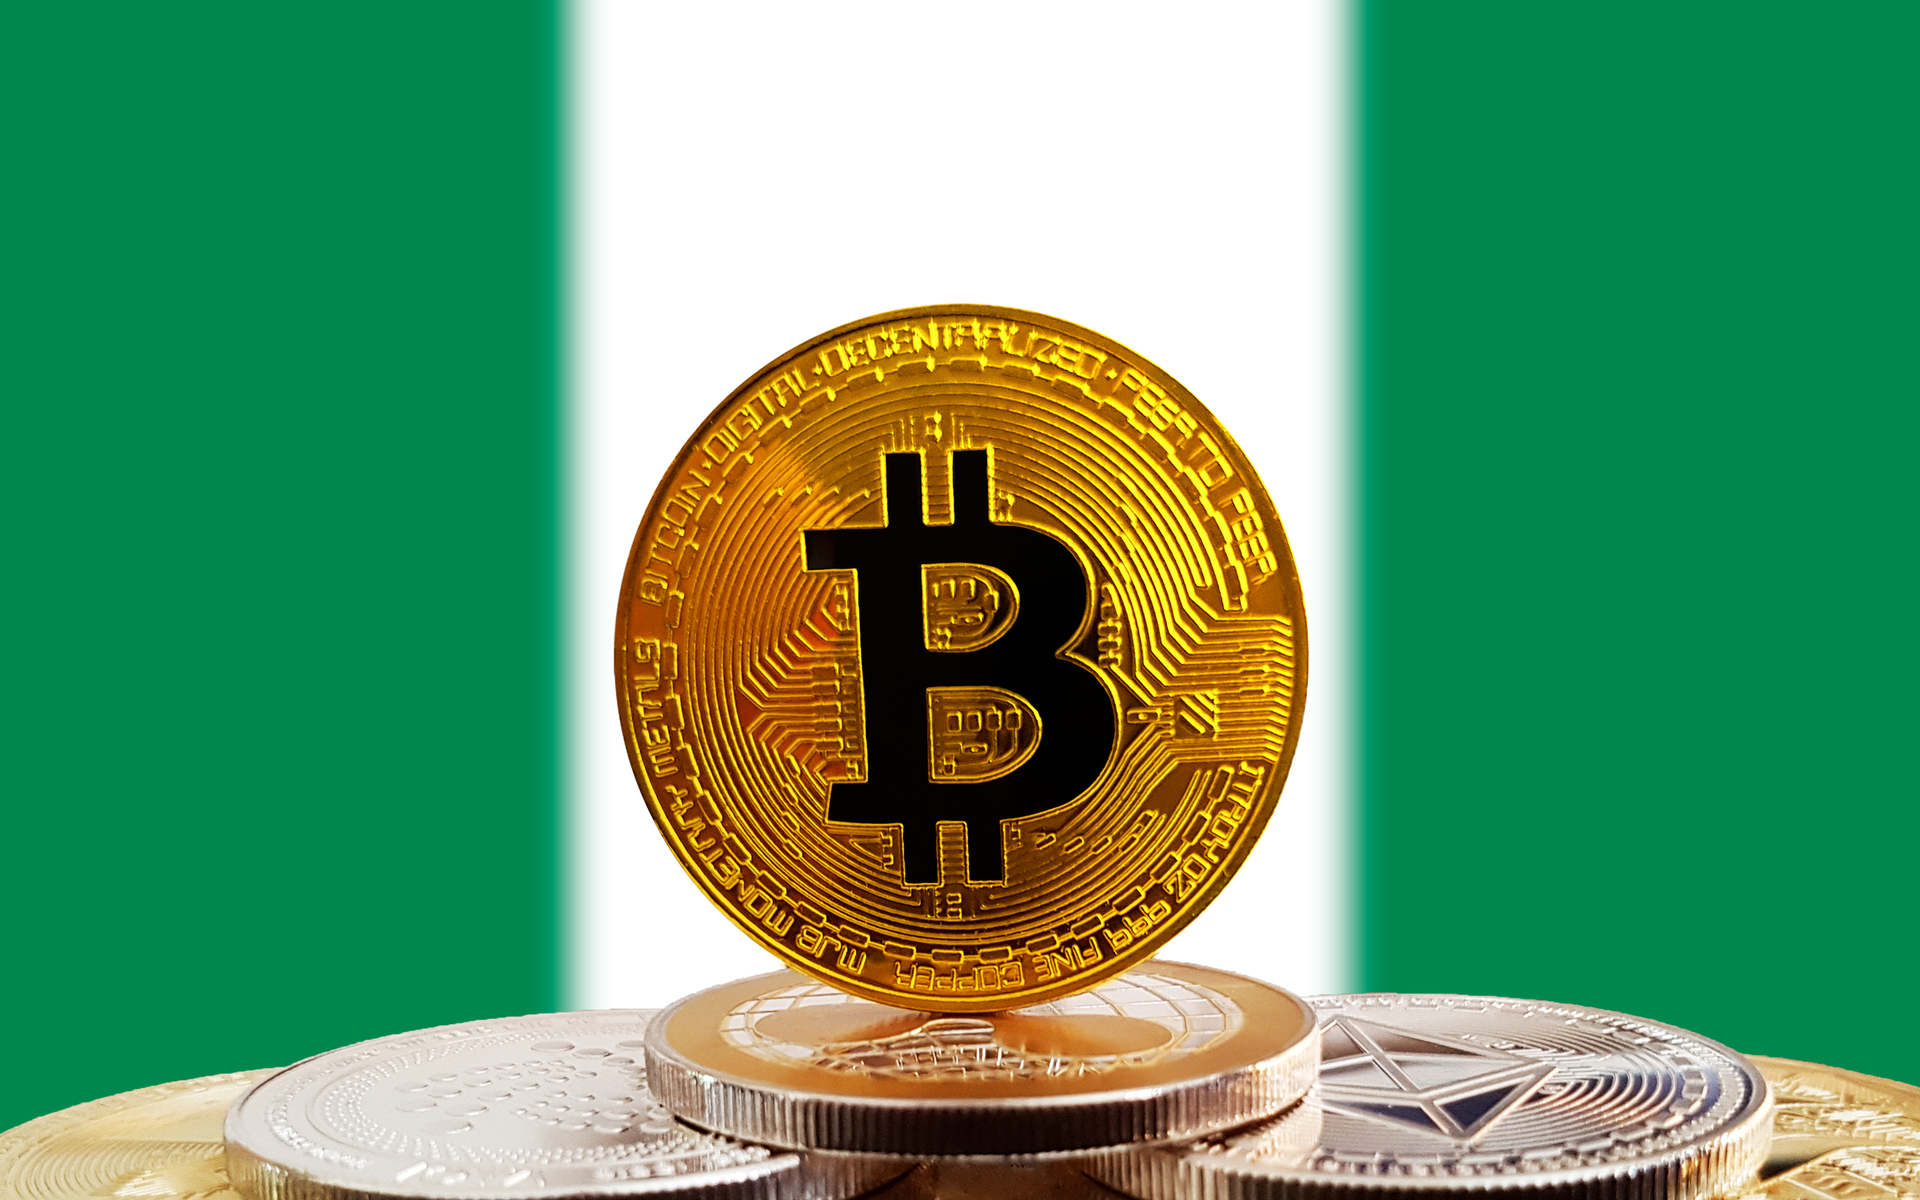 Bitcoin standing on top of other bitcoins with a Nigerian flag in the background